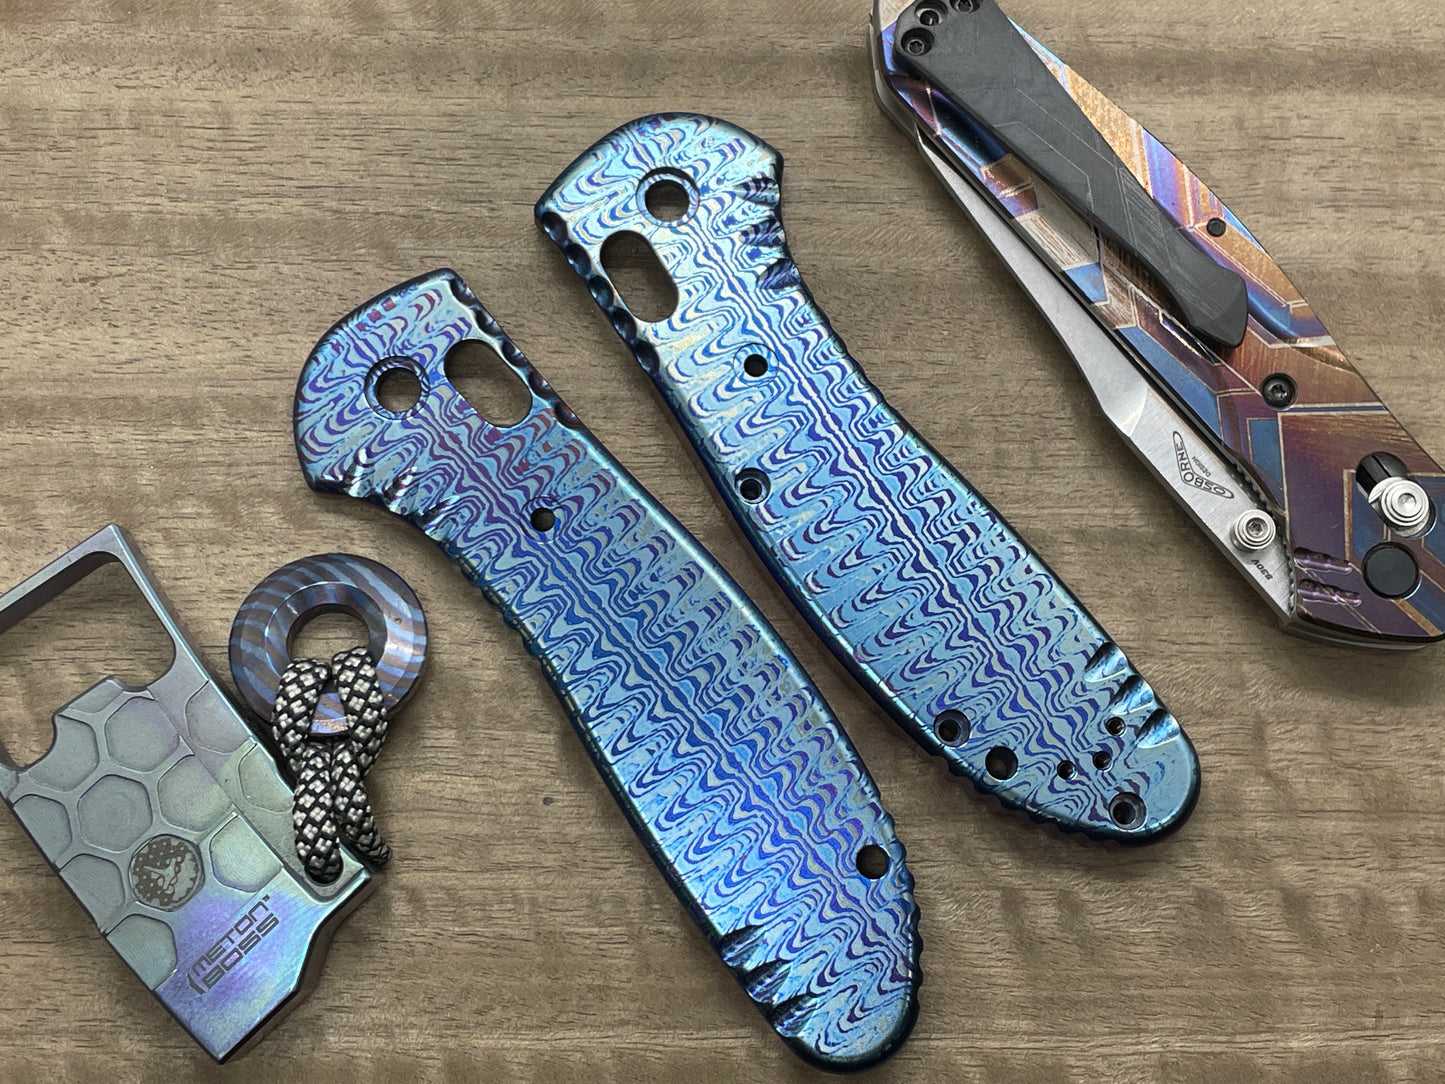 RIPPLE Flamed Titanium Scales for Benchmade GRIPTILIAN 551 & 550